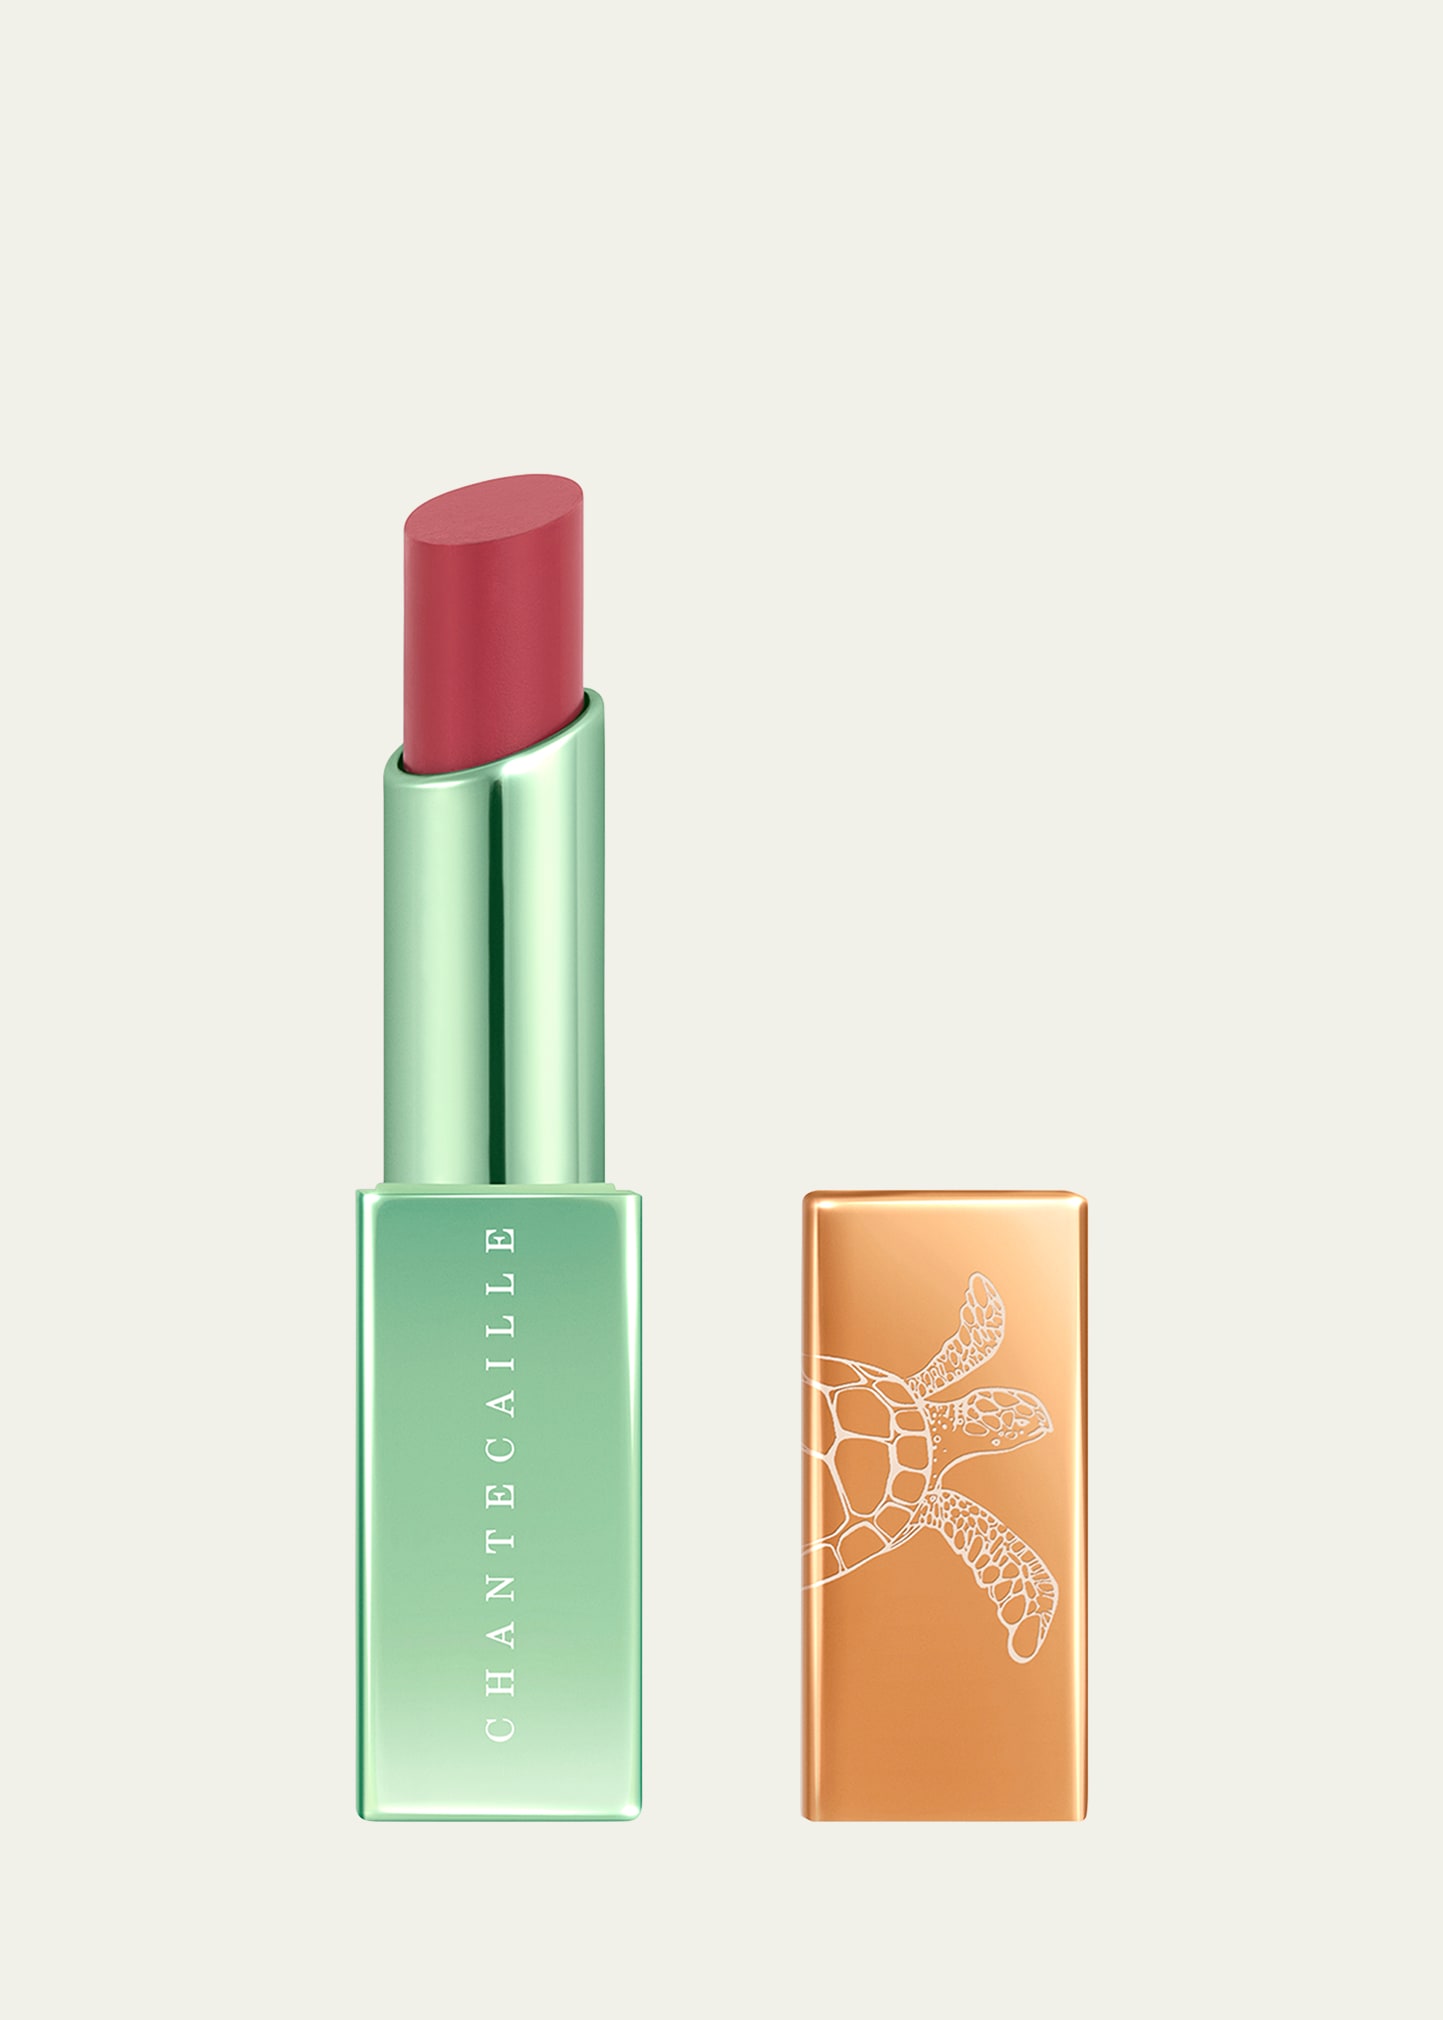 Chantecaille Limited Edition Sea Turtle Lip Chic In Rosea - Warm